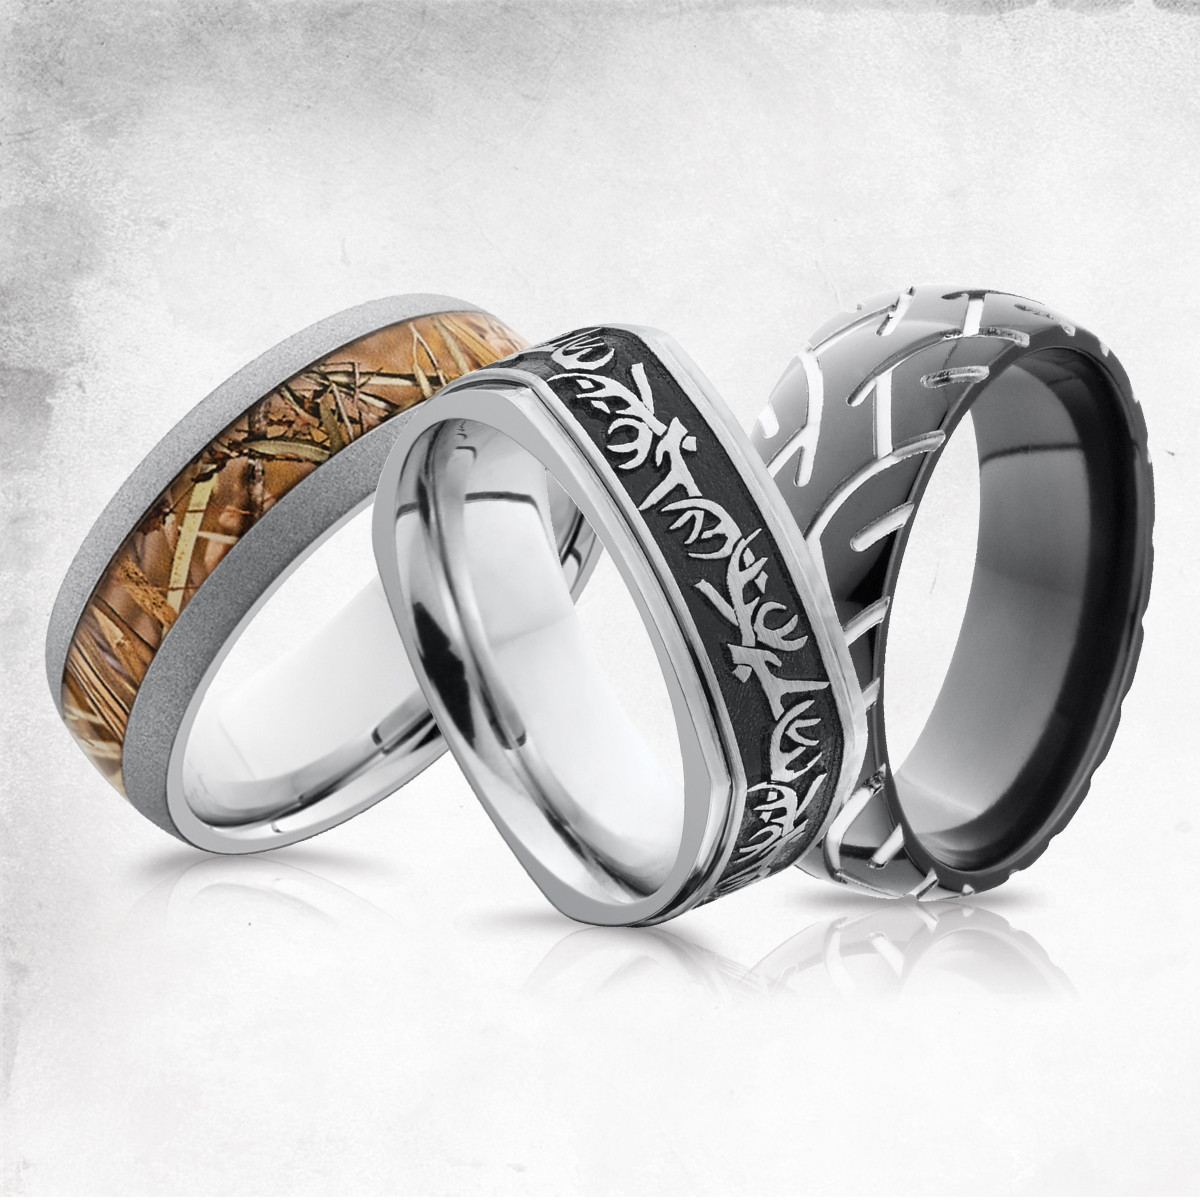 Camo Wedding Rings For Her
 View Full Gallery of Elegant camo wedding bands for her